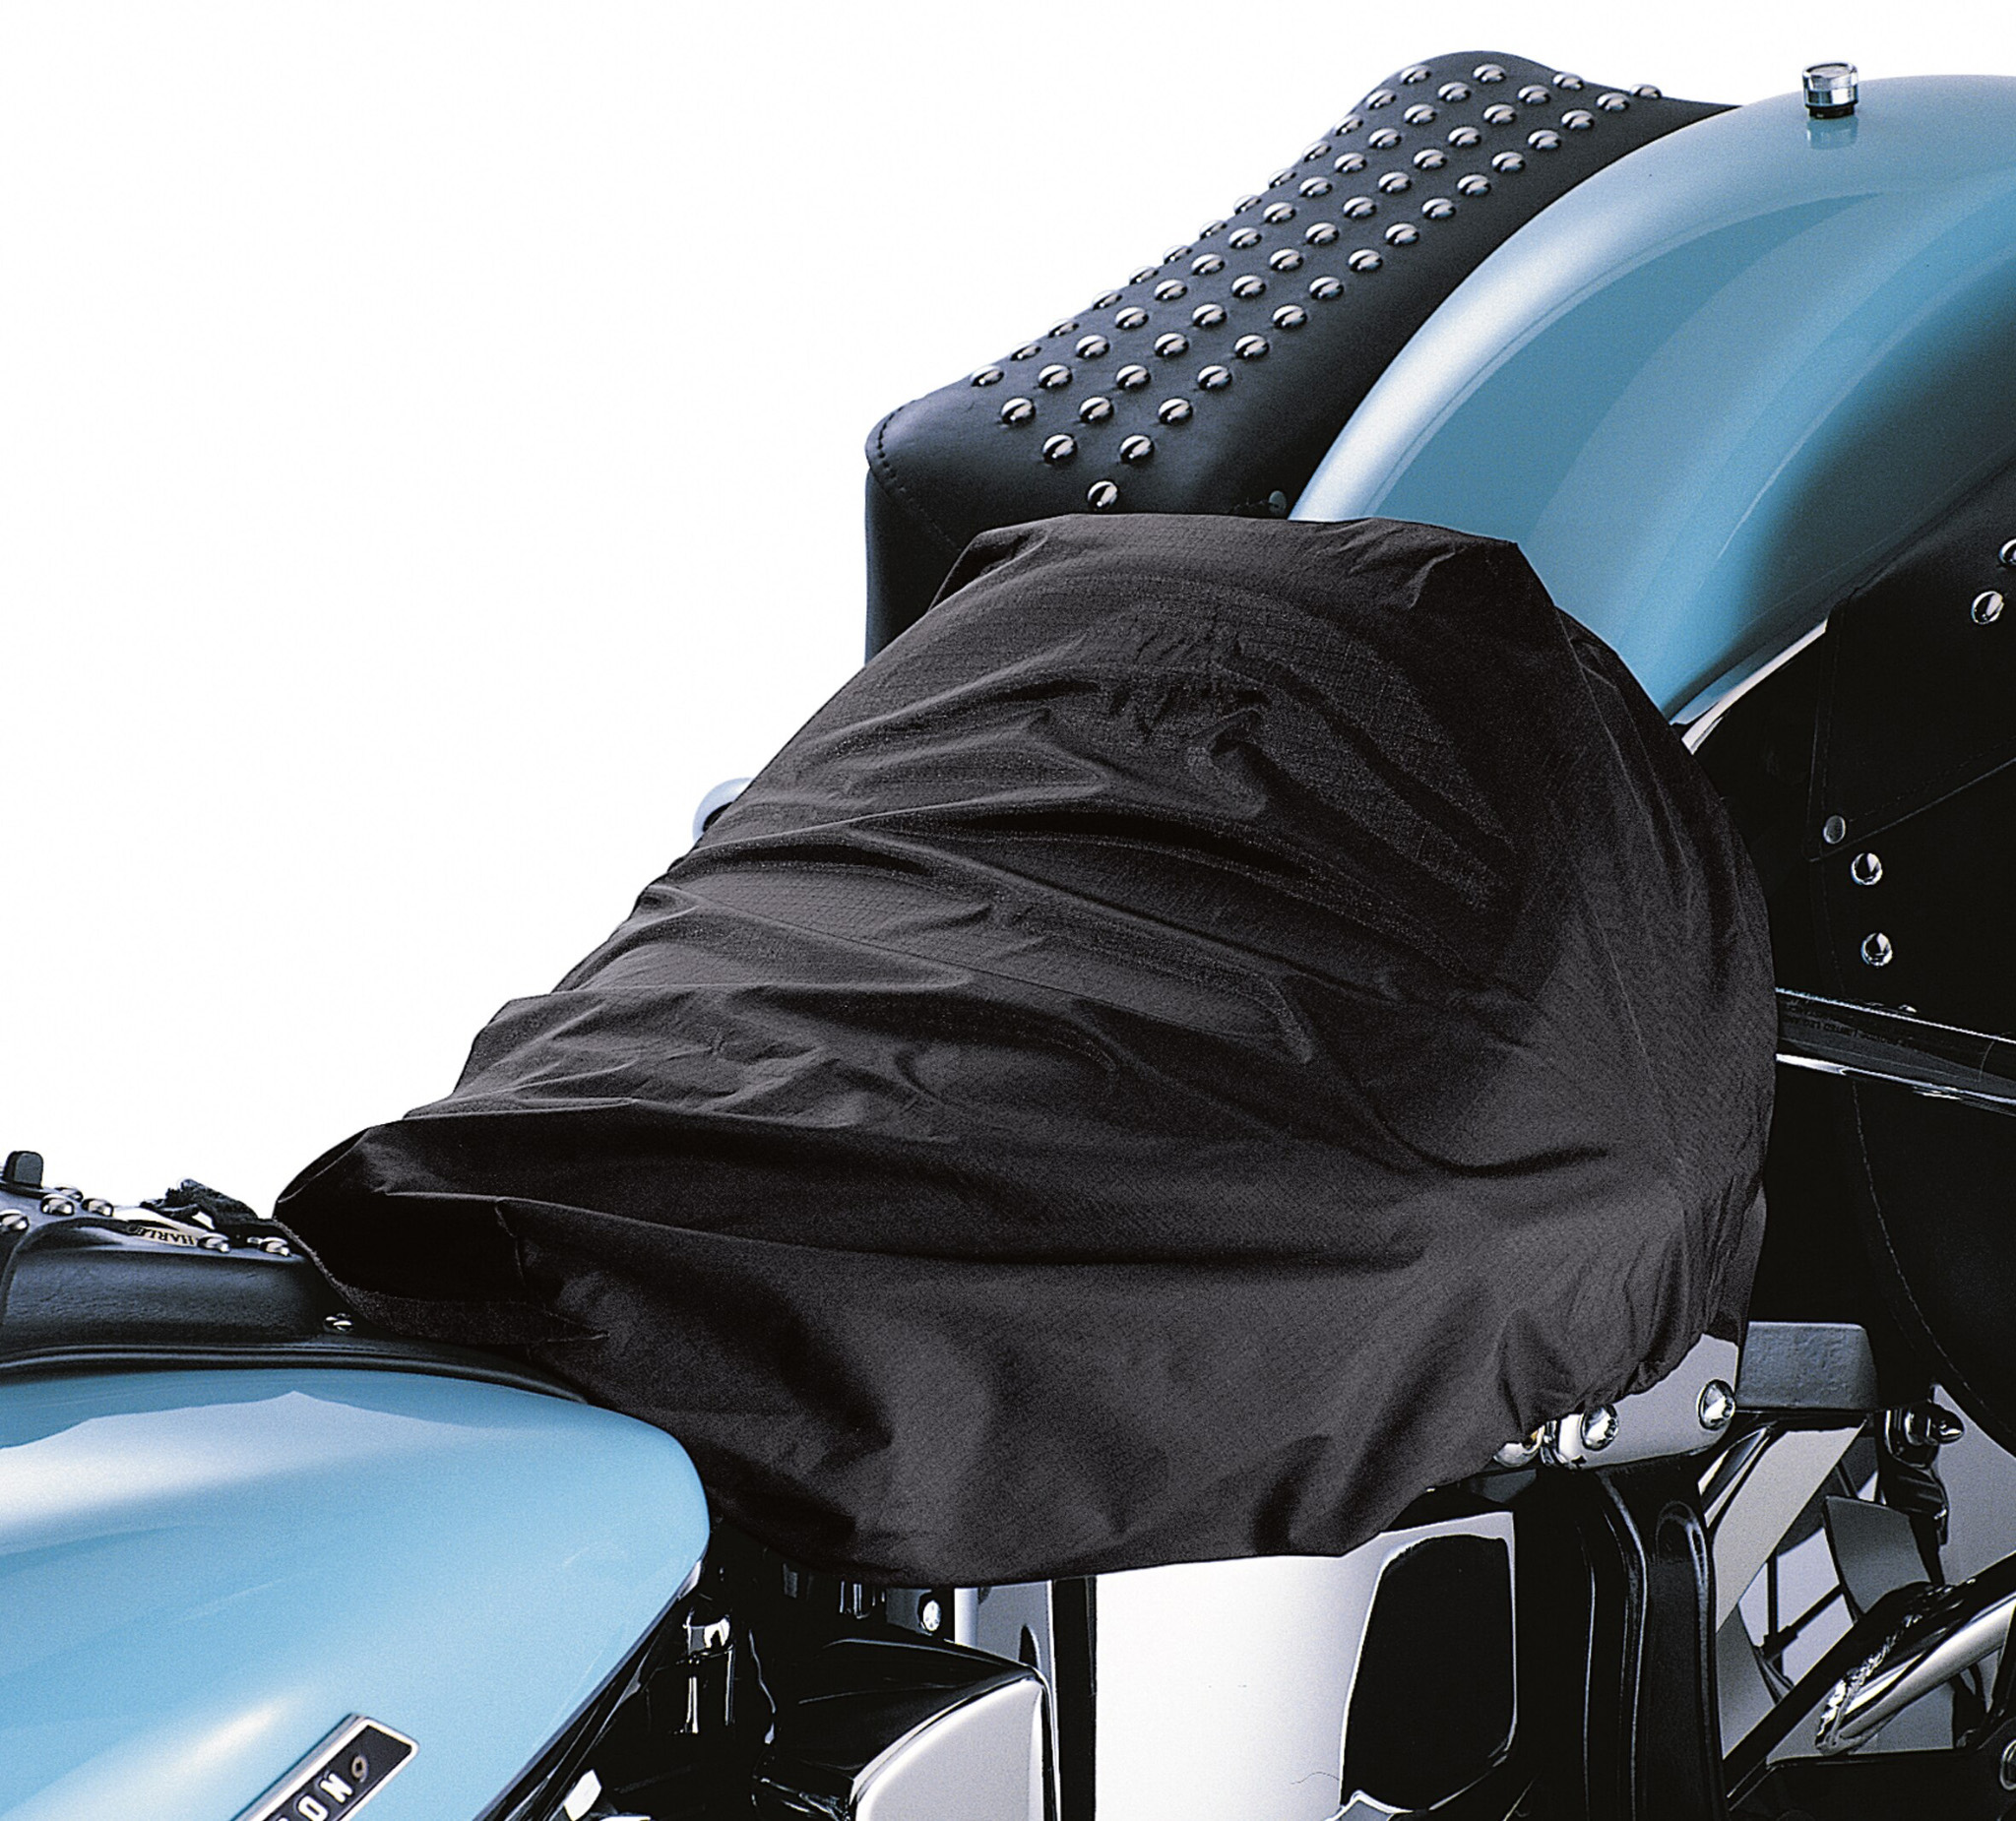 Harley Davidson Two up seat rain cover 51639-97 